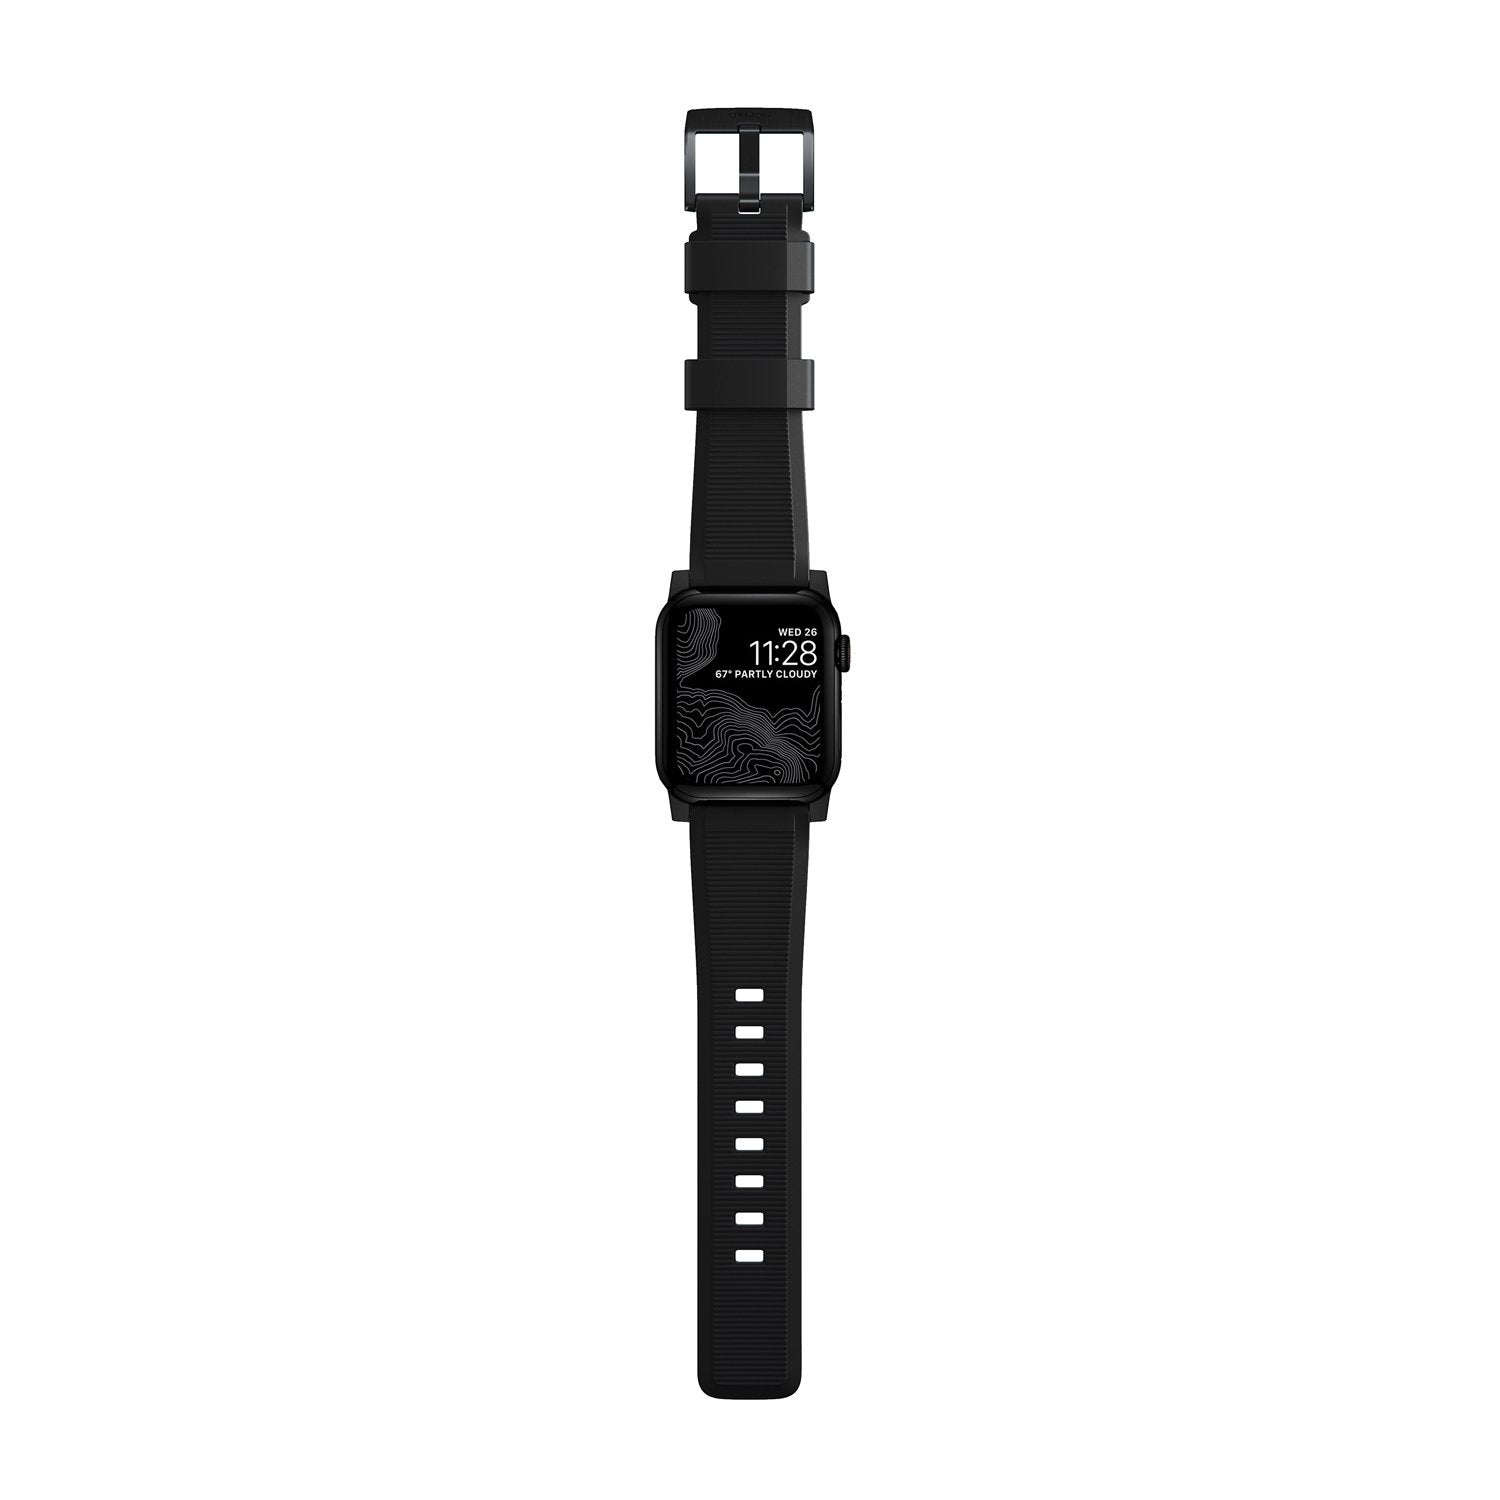 NOMAD Rugged Strap(FKM) for Apple Watch 40mm/38mm, Black Hardware Apple Watch Strap NOMAD 